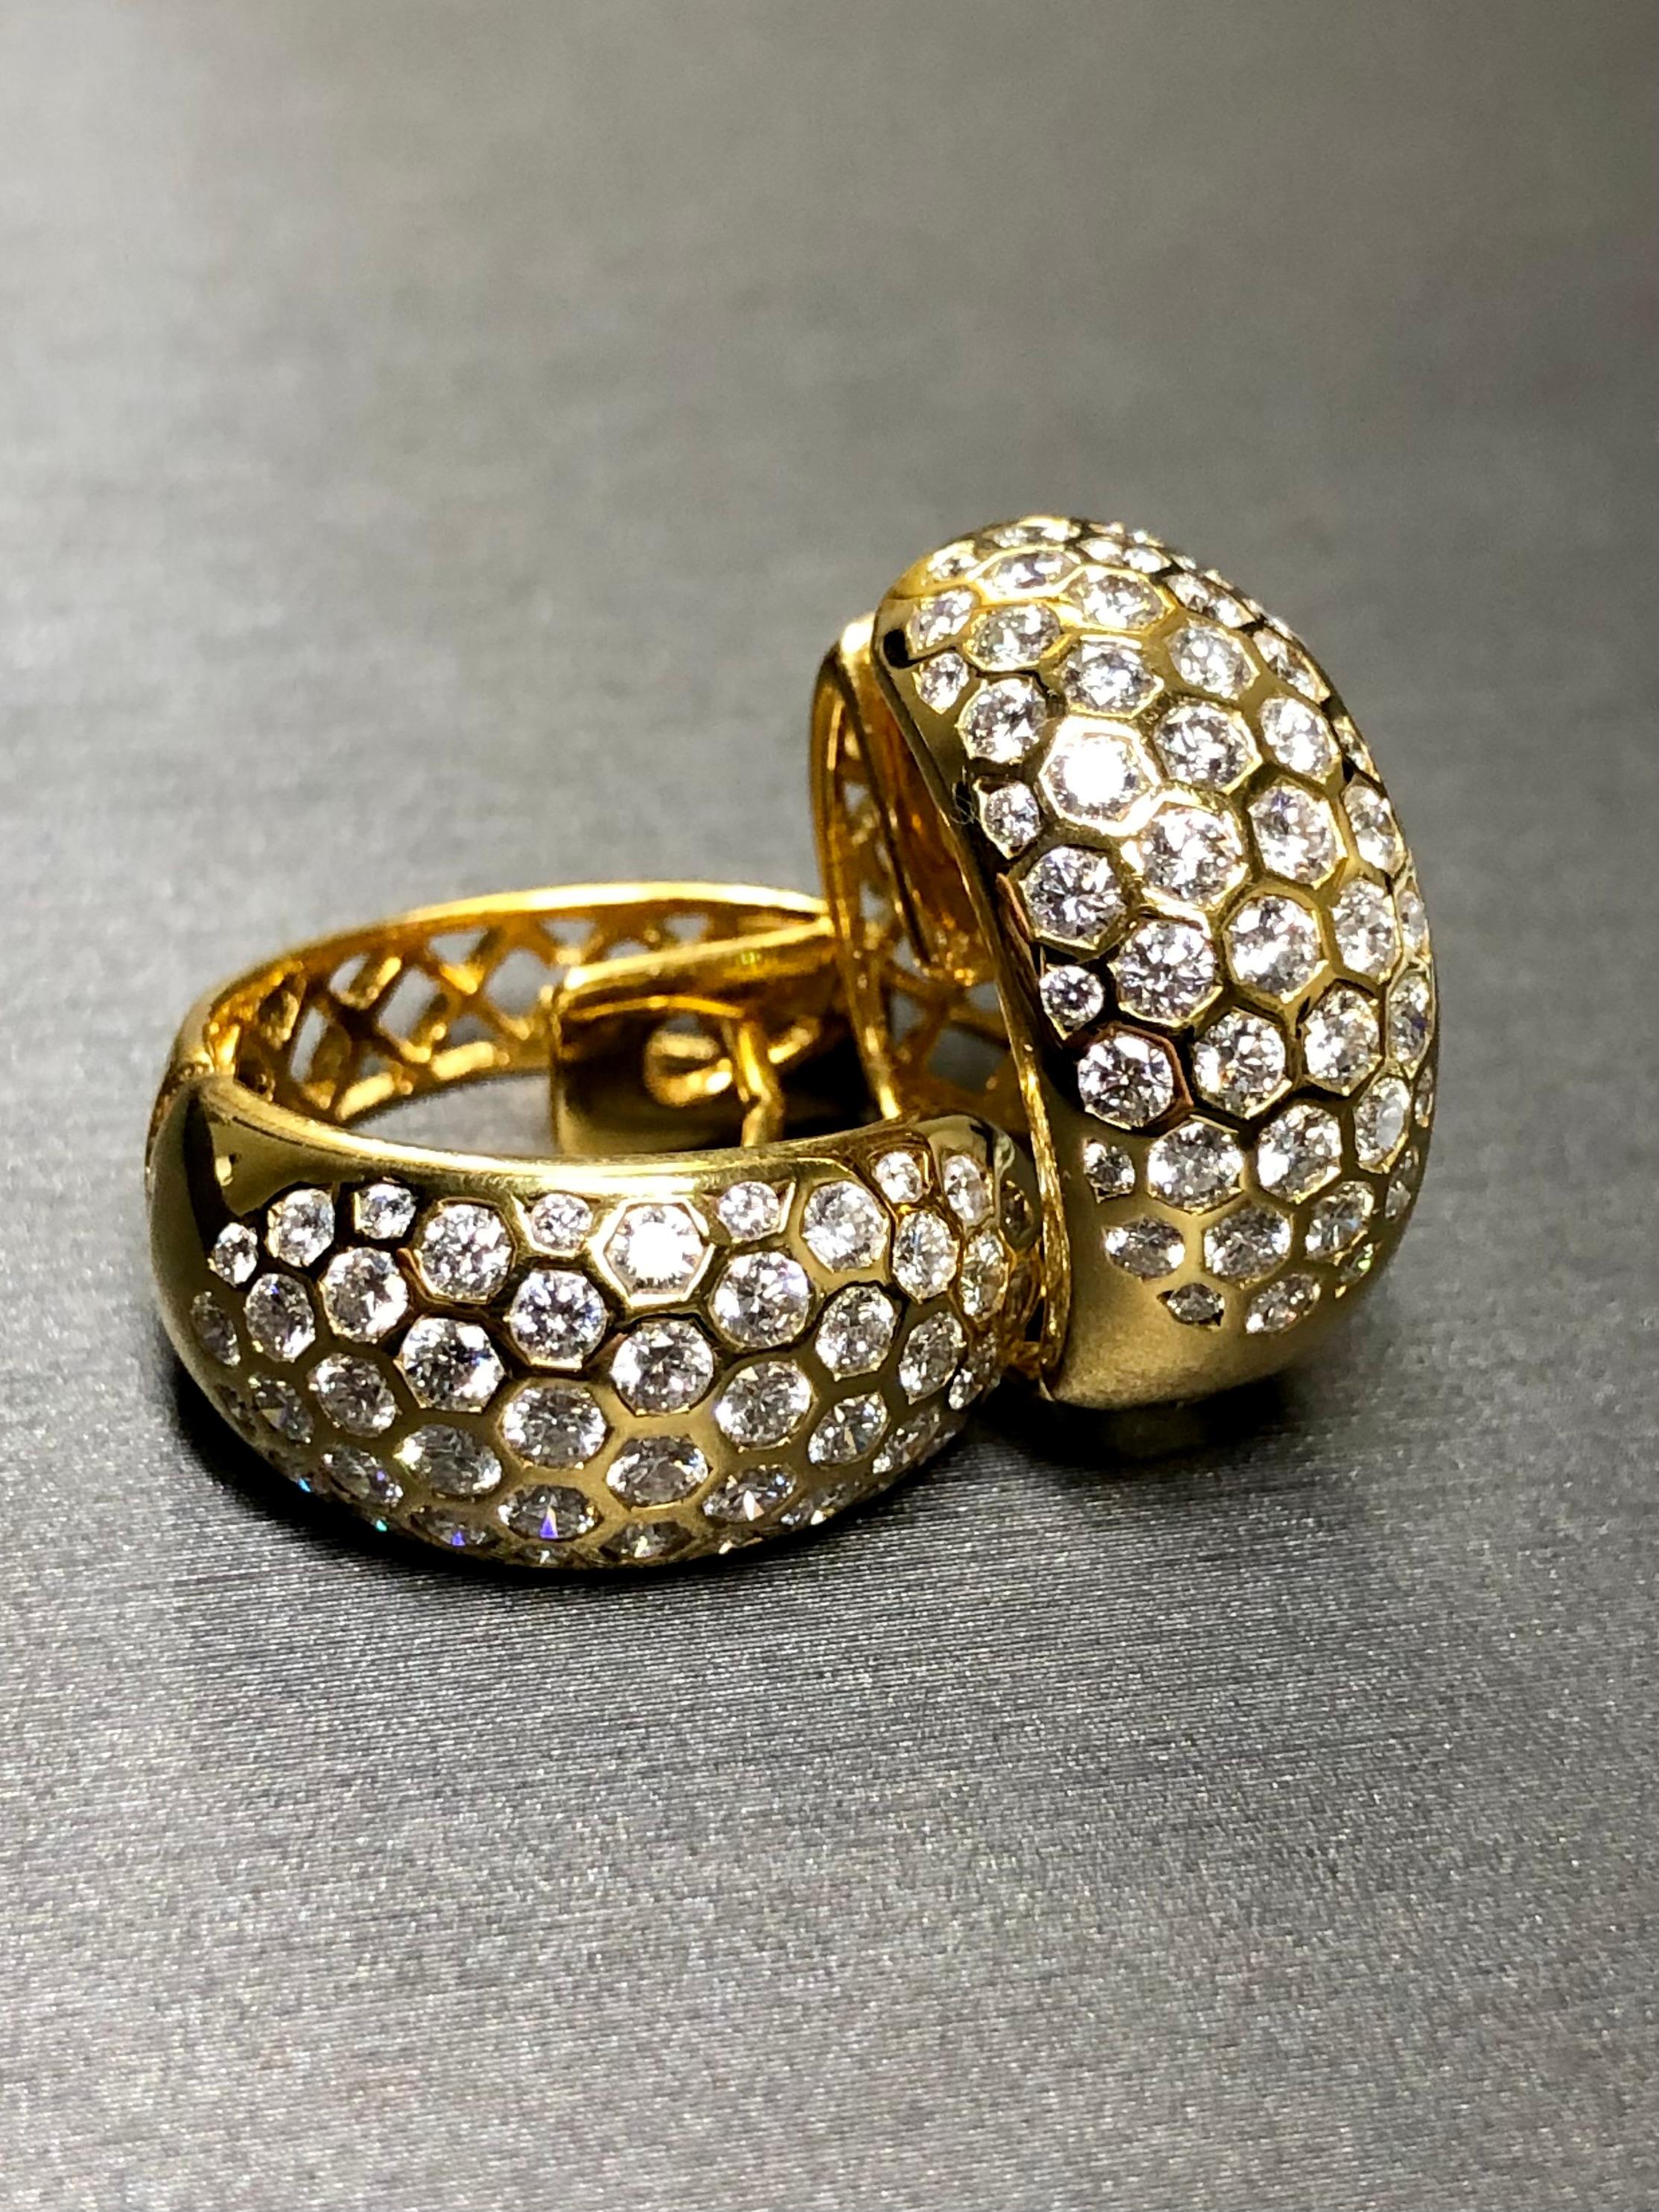 
An exquisitely made pair of diamond earrings hand crafted in 18K yellow gold. All diamonds are F-G color and Vs1+ clarity with a total approximate weight of 2.80cttw. The setting and construction is impeccable. No expense was